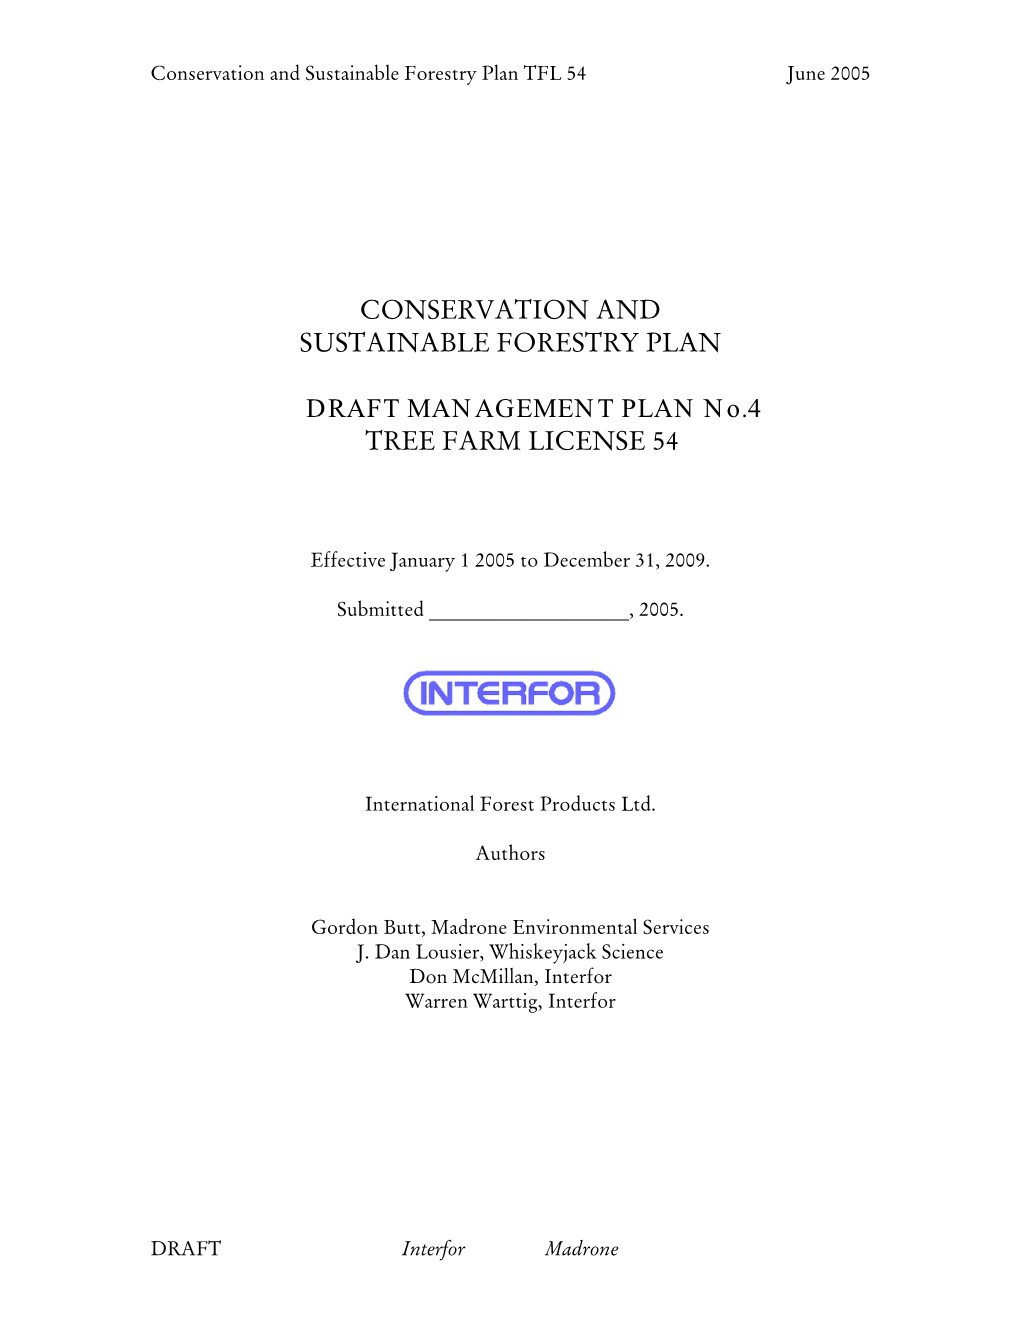 Conservation and Sustainable Forestry Plan TFL 54 June 2005